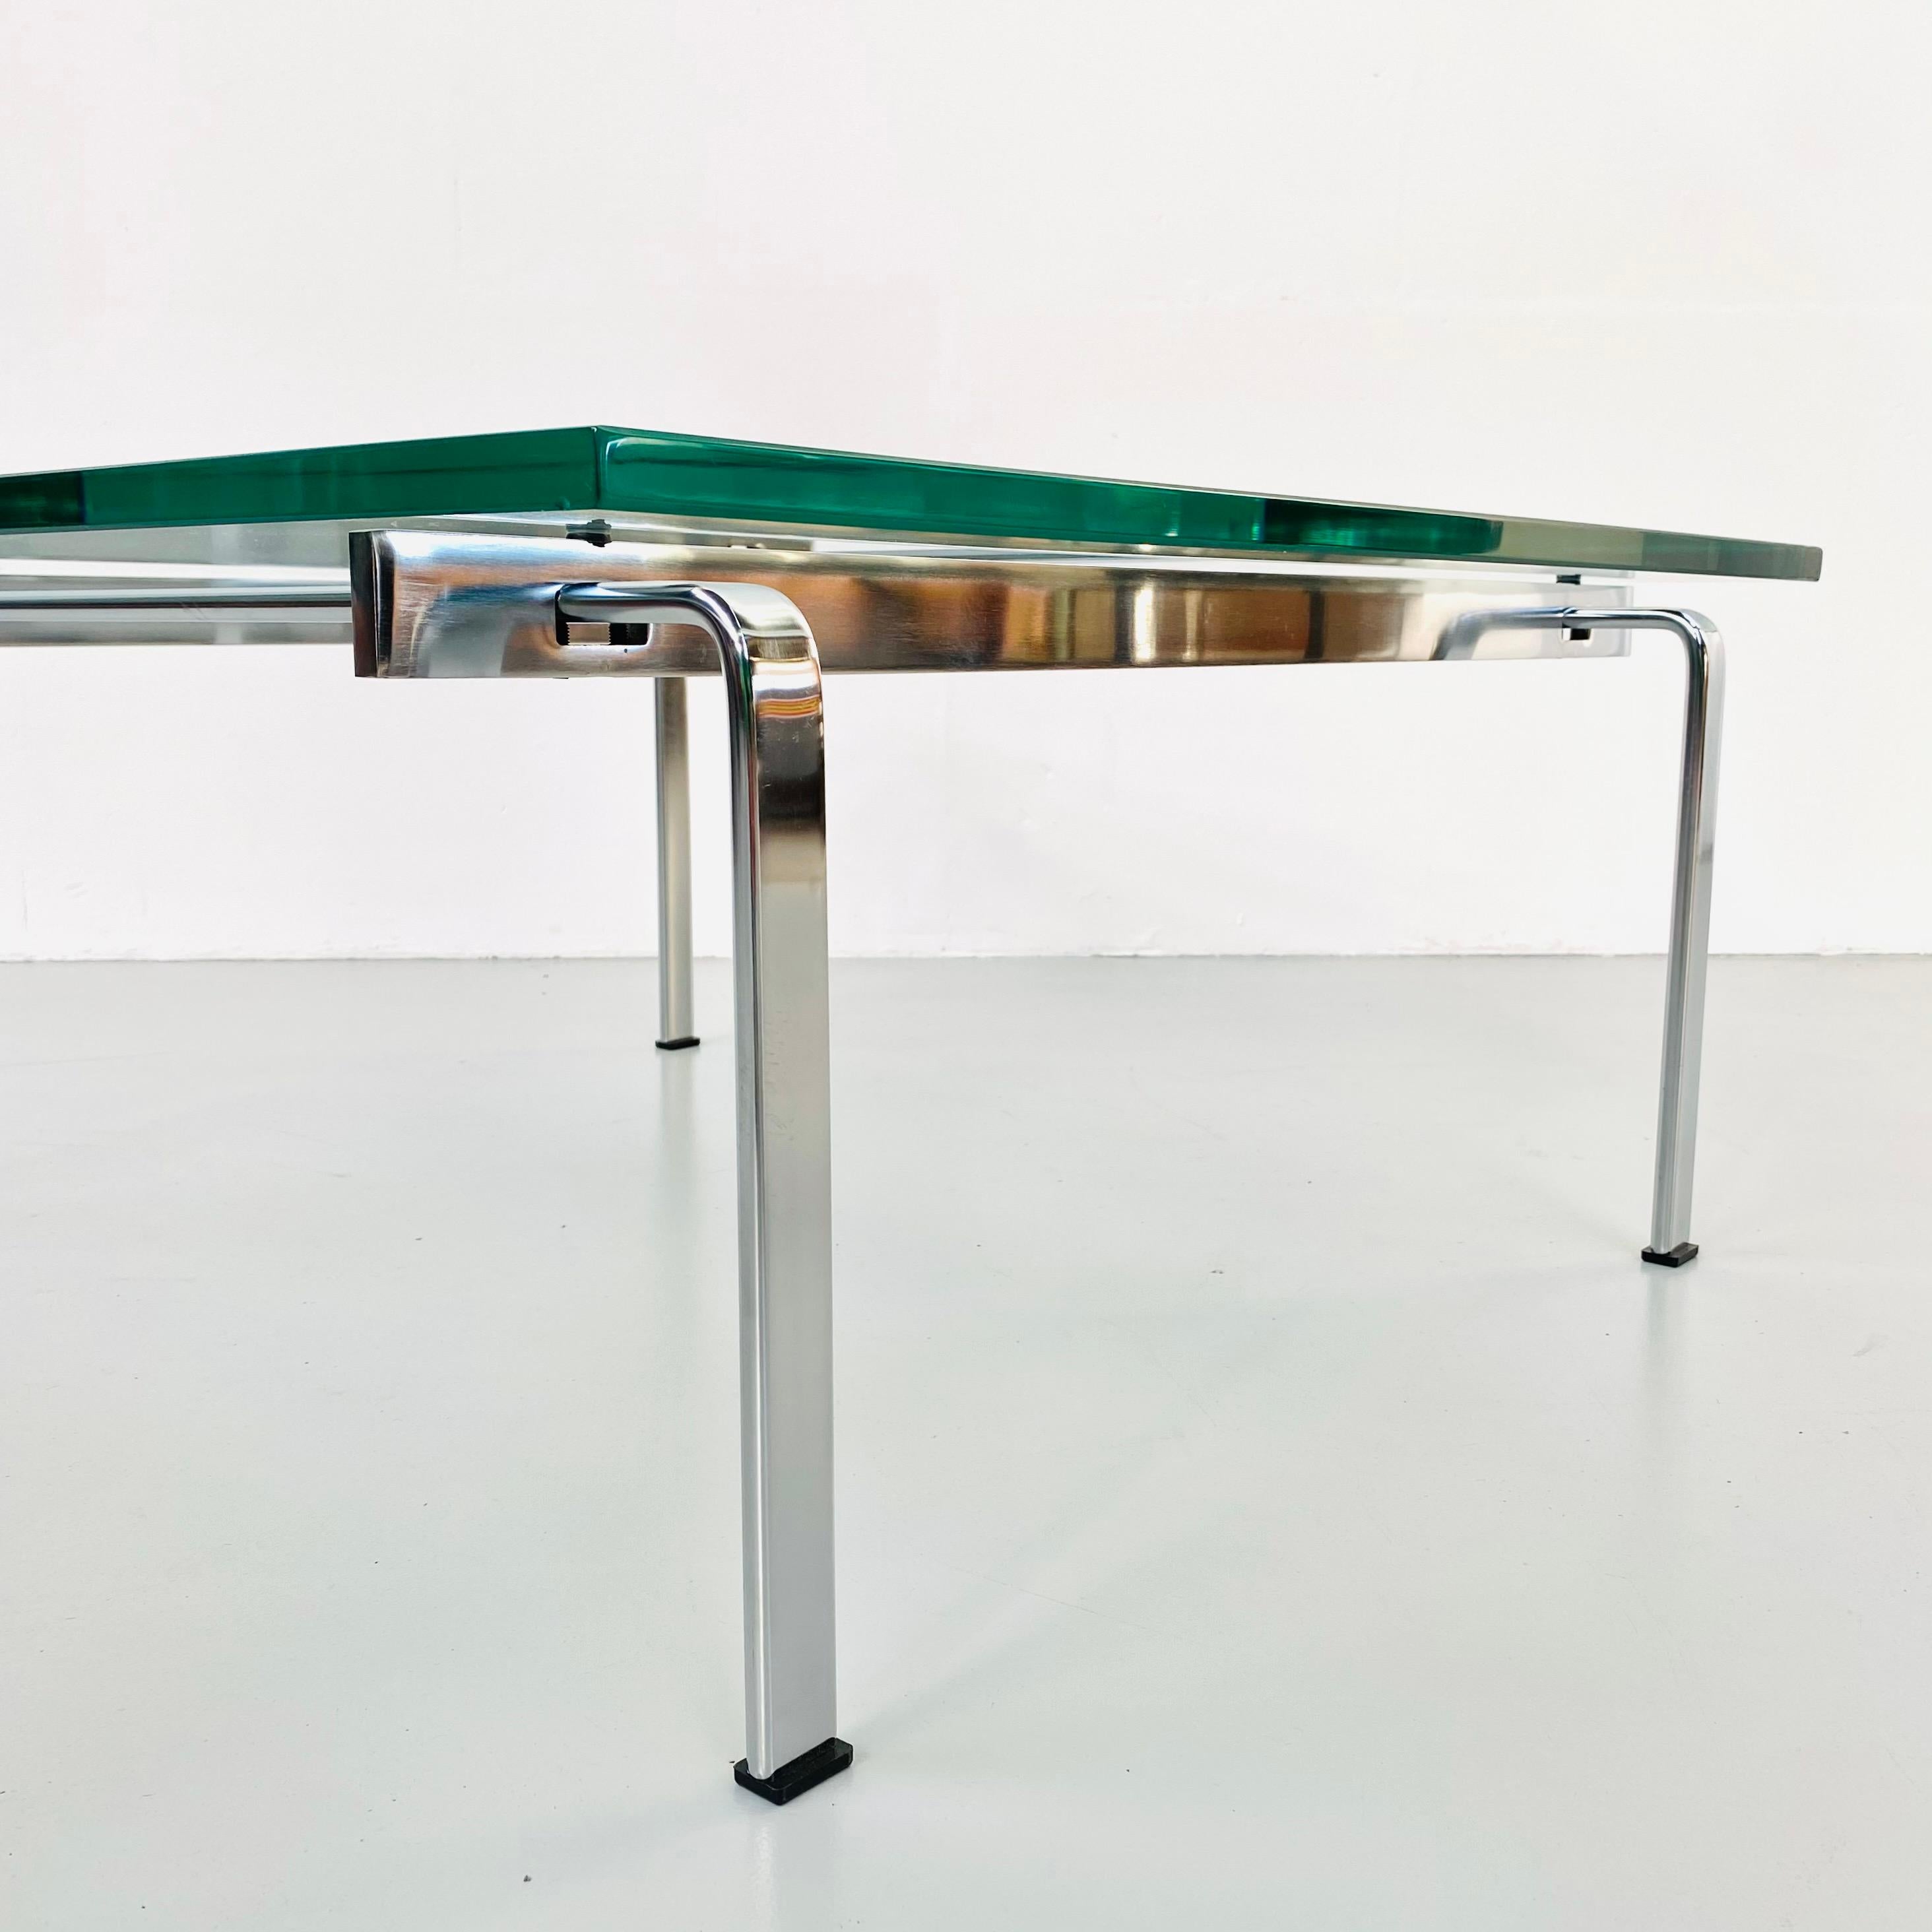 Steel Danish FK90 Coffeetable by Fabricius & Kastholm for Kill international, 1960s For Sale